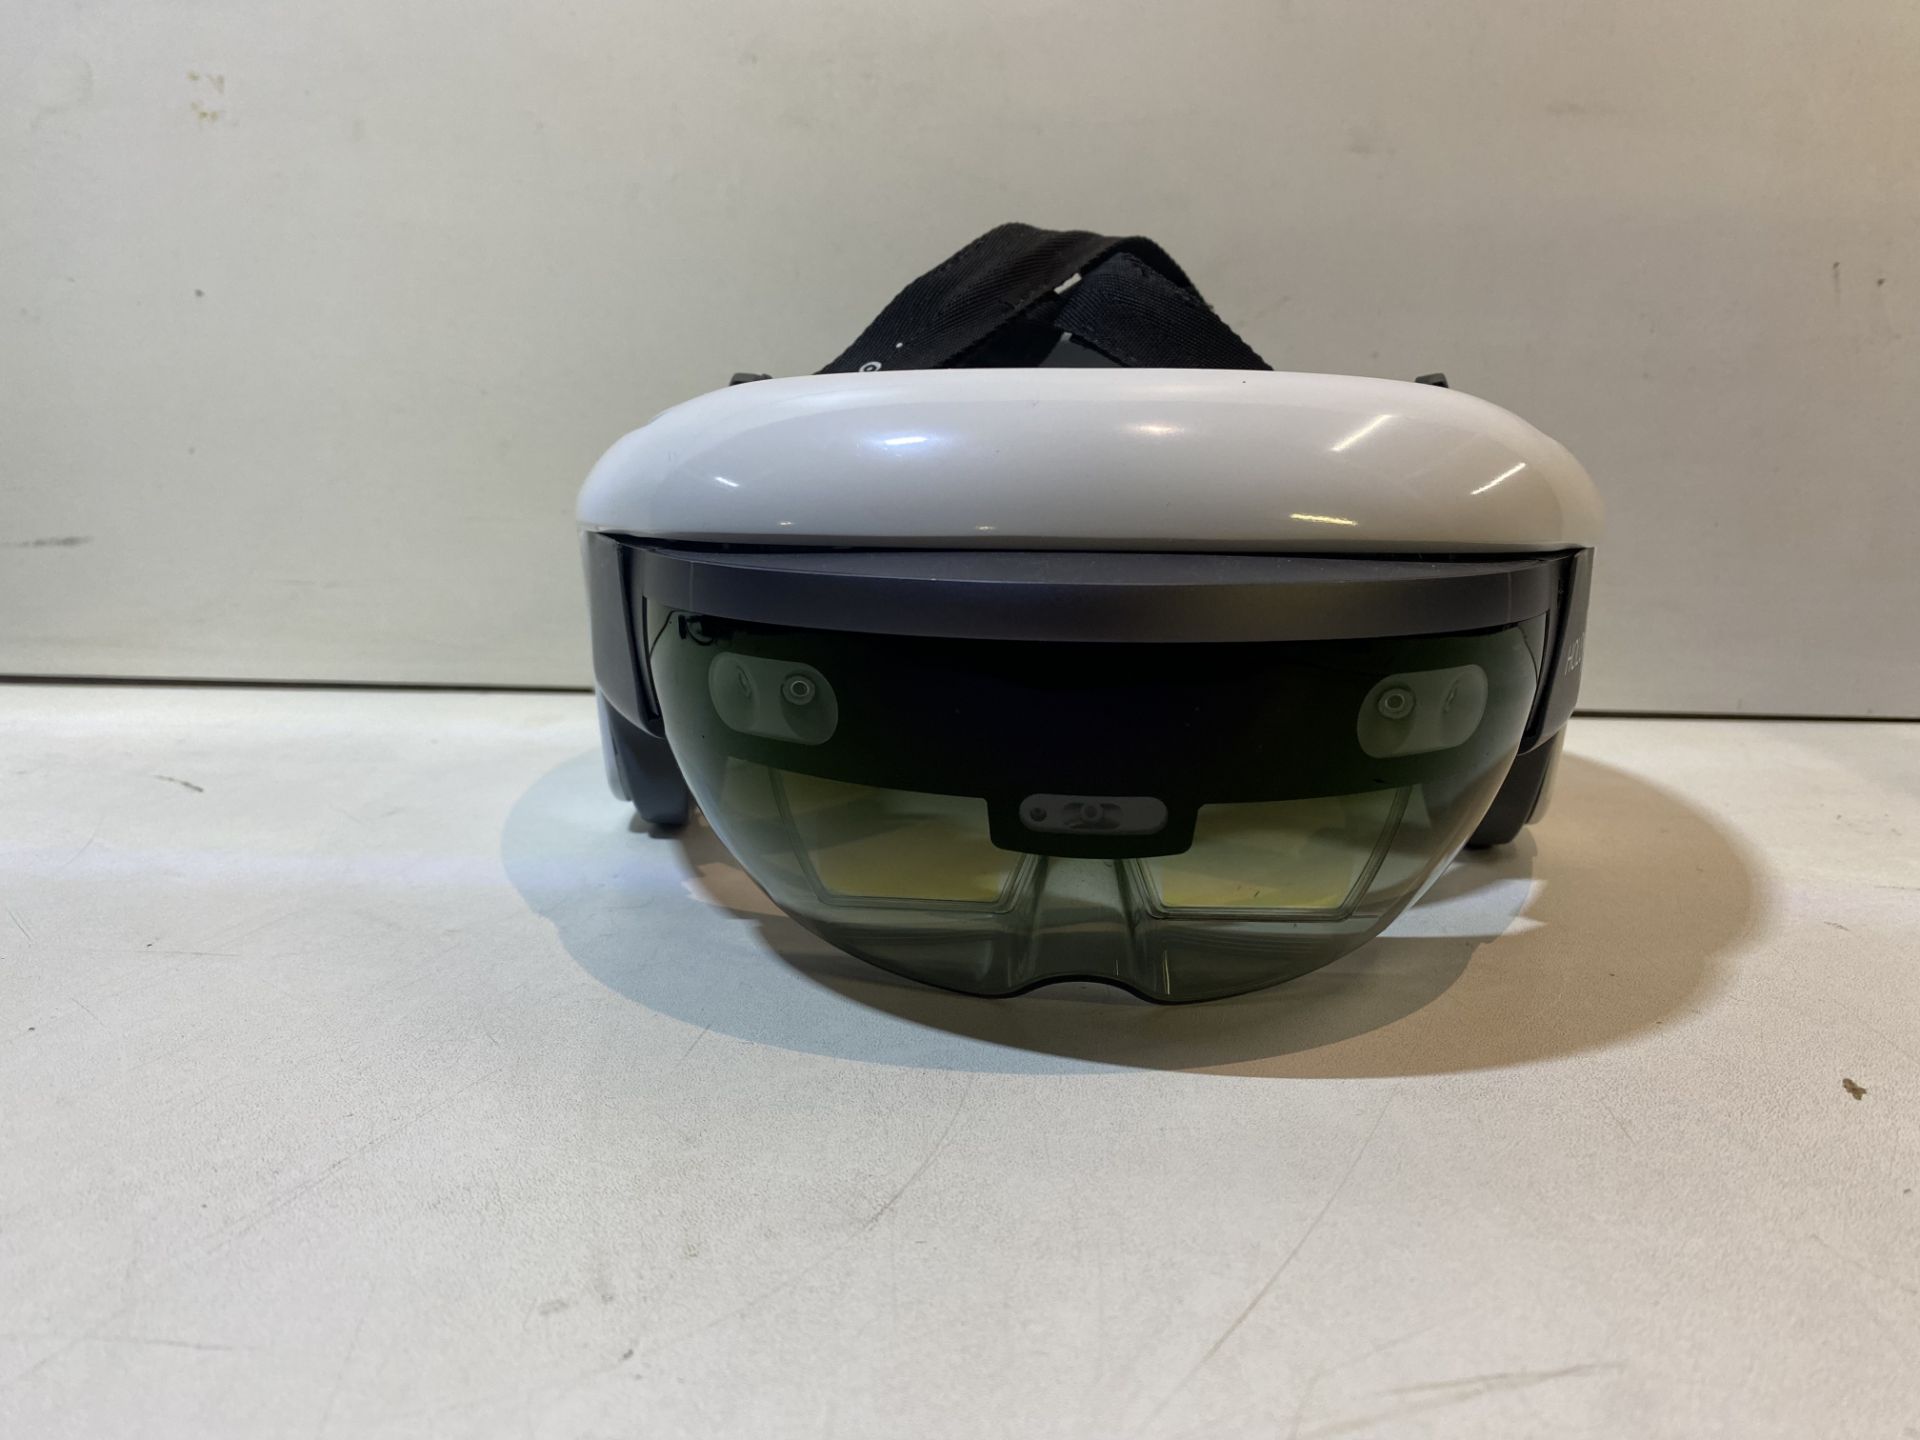 Microsoft HoloLens Holographic Mixed Reality Headset w/ Carry Case - Image 2 of 10